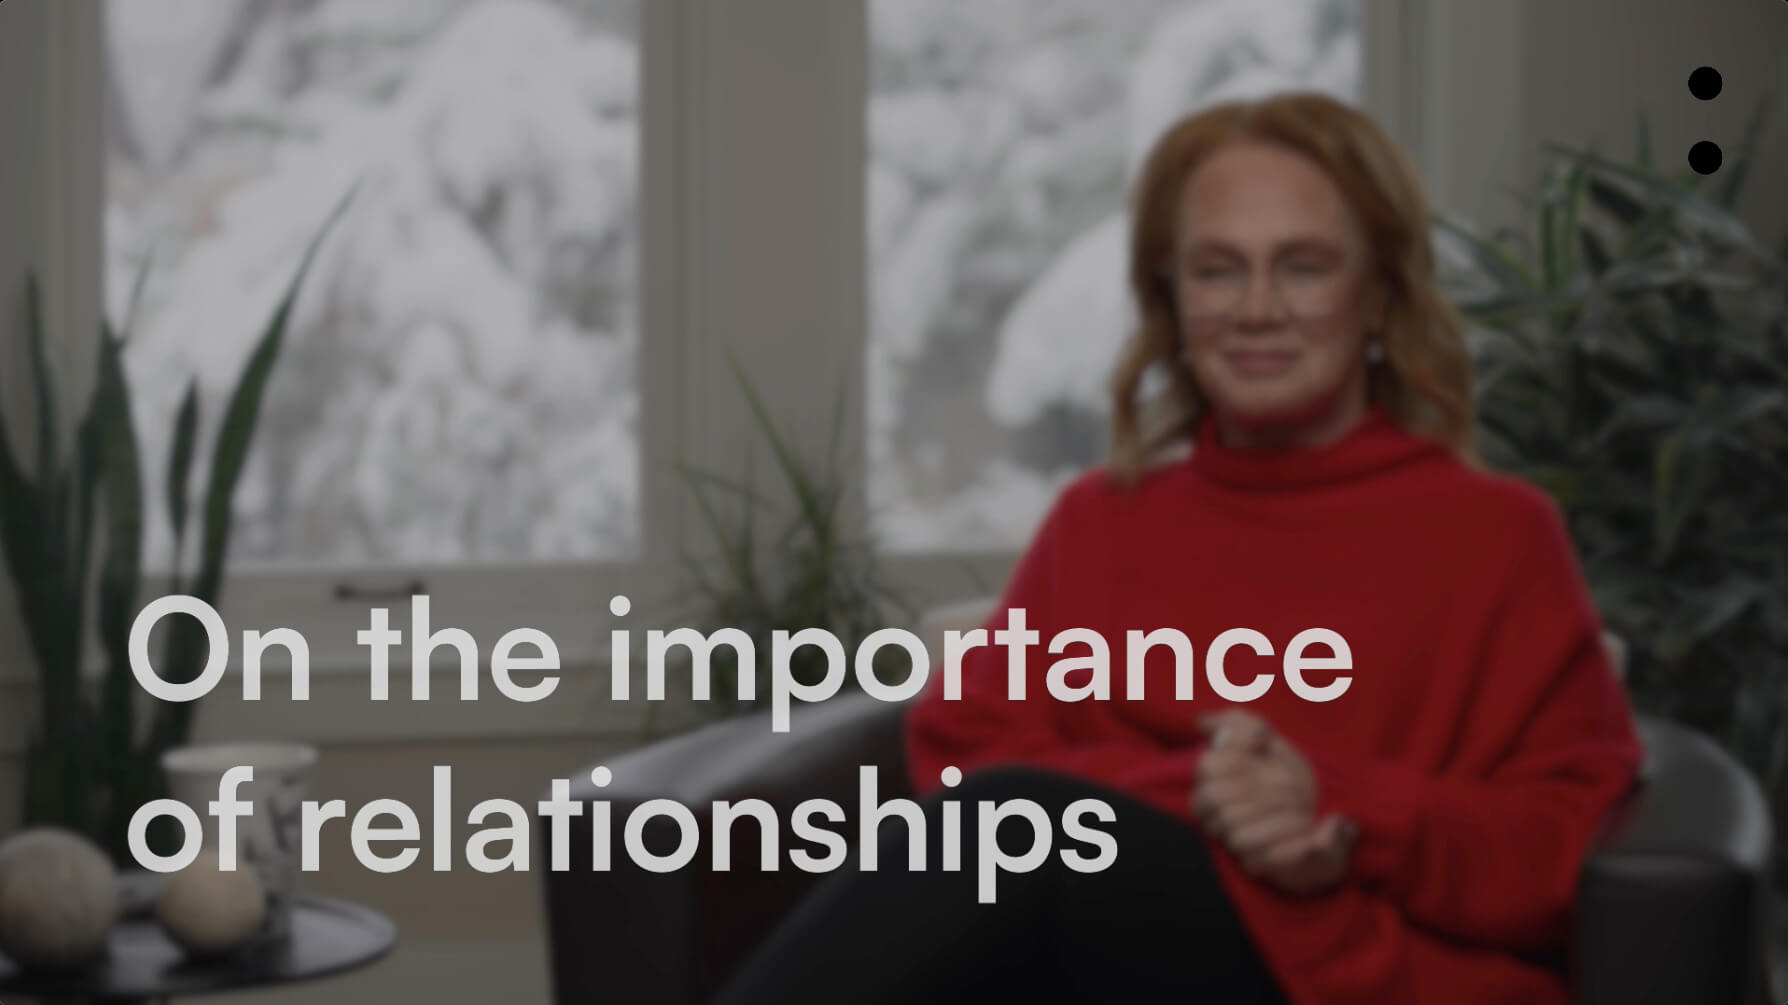 On the importance of relationships.